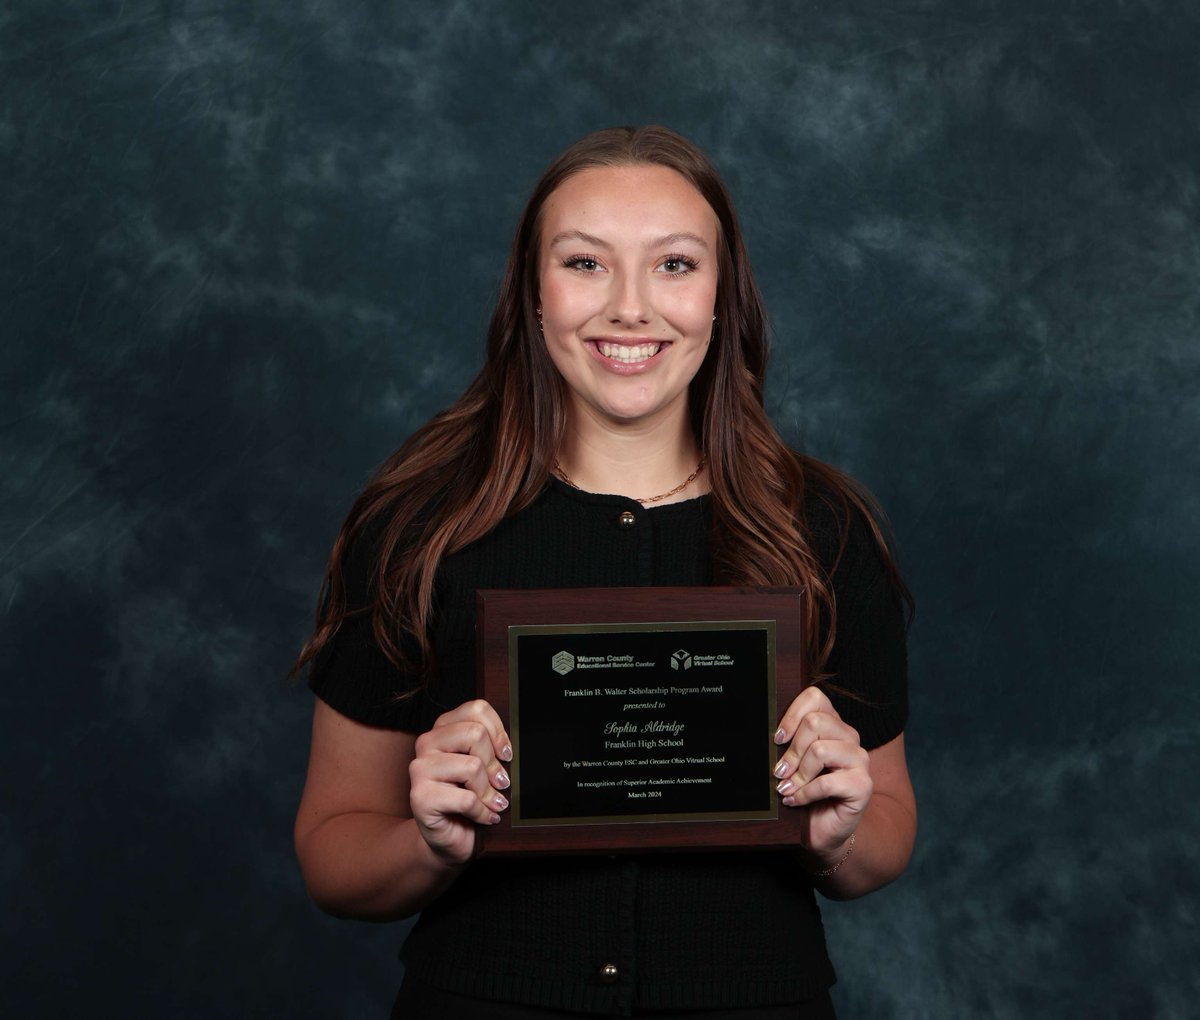 Congratulations to Franklin City Schools' Franklin B. Walter Scholarship winner, Sophia Aldridge. Aldridge was recently honored at a banquet at the Warren County ESC. She plans to attend Indiana University this fall. Sophia recognized Veronica Kiefaber as her mentor.